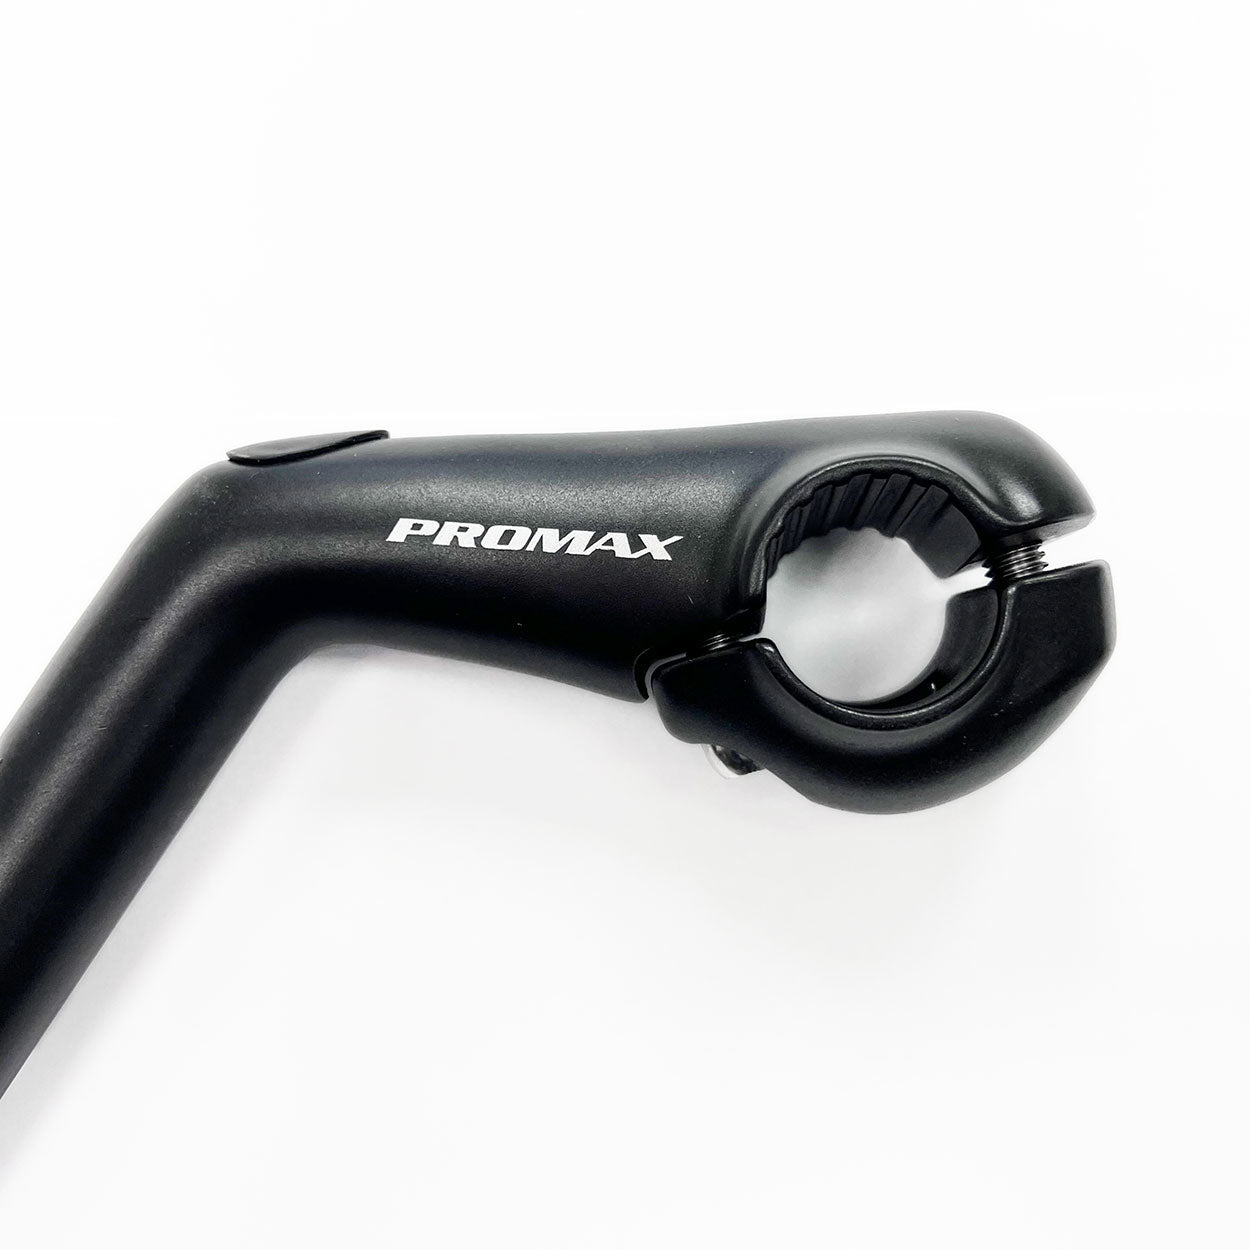 Quill Stem For Cruiser Promax